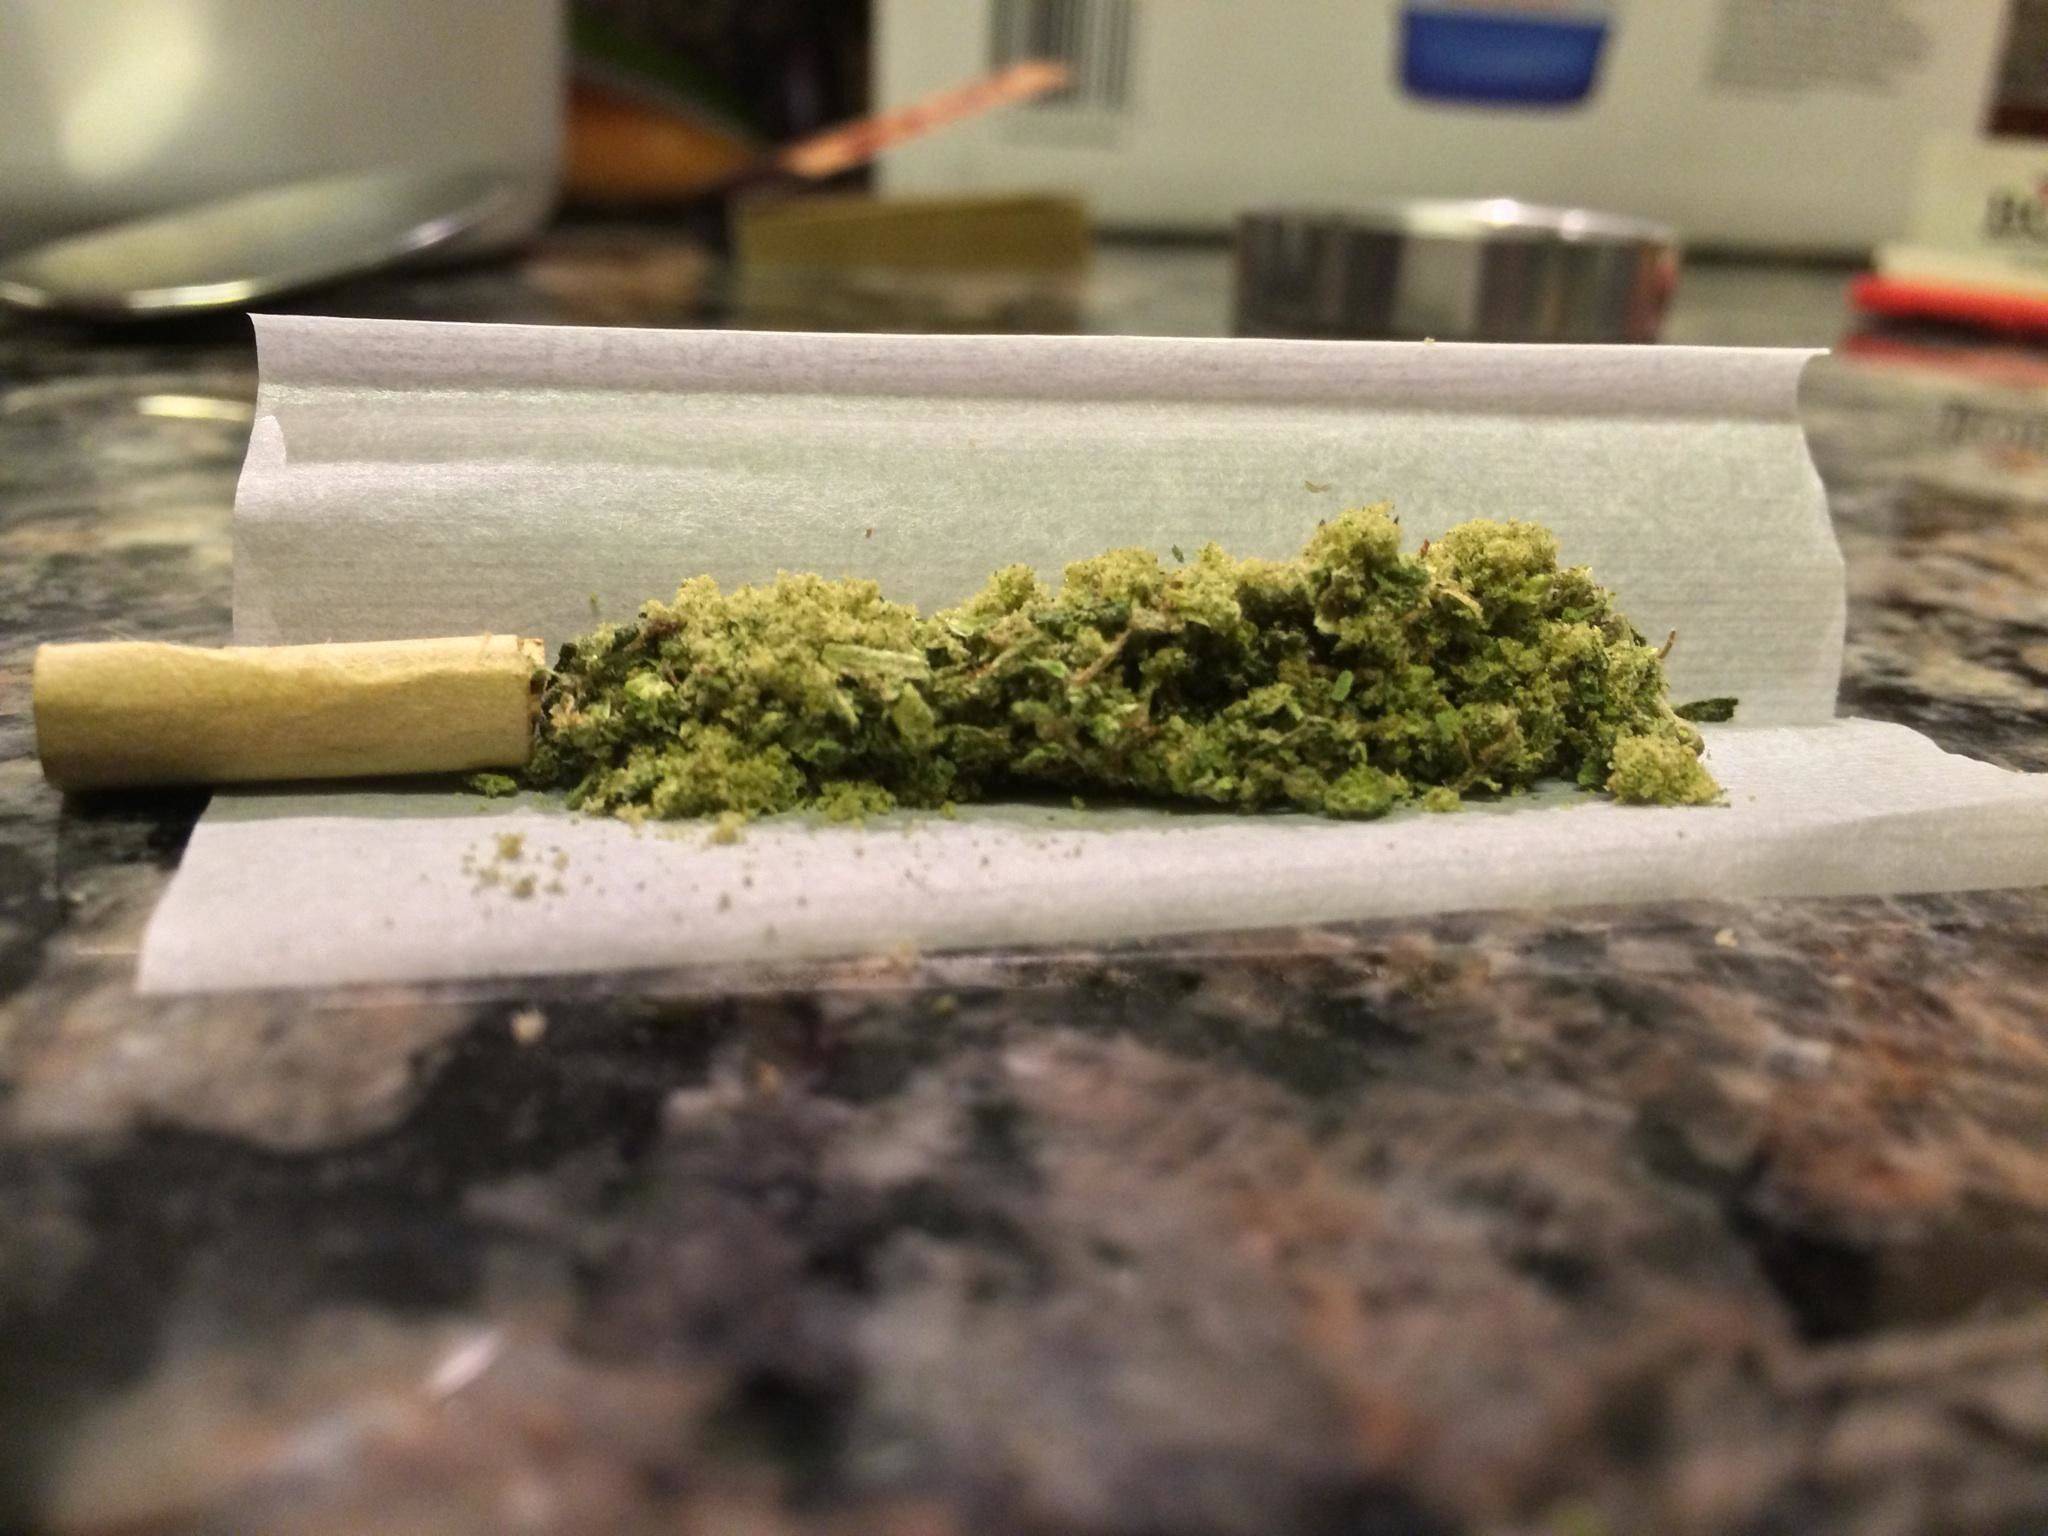 Gunner reccomend rolling joint